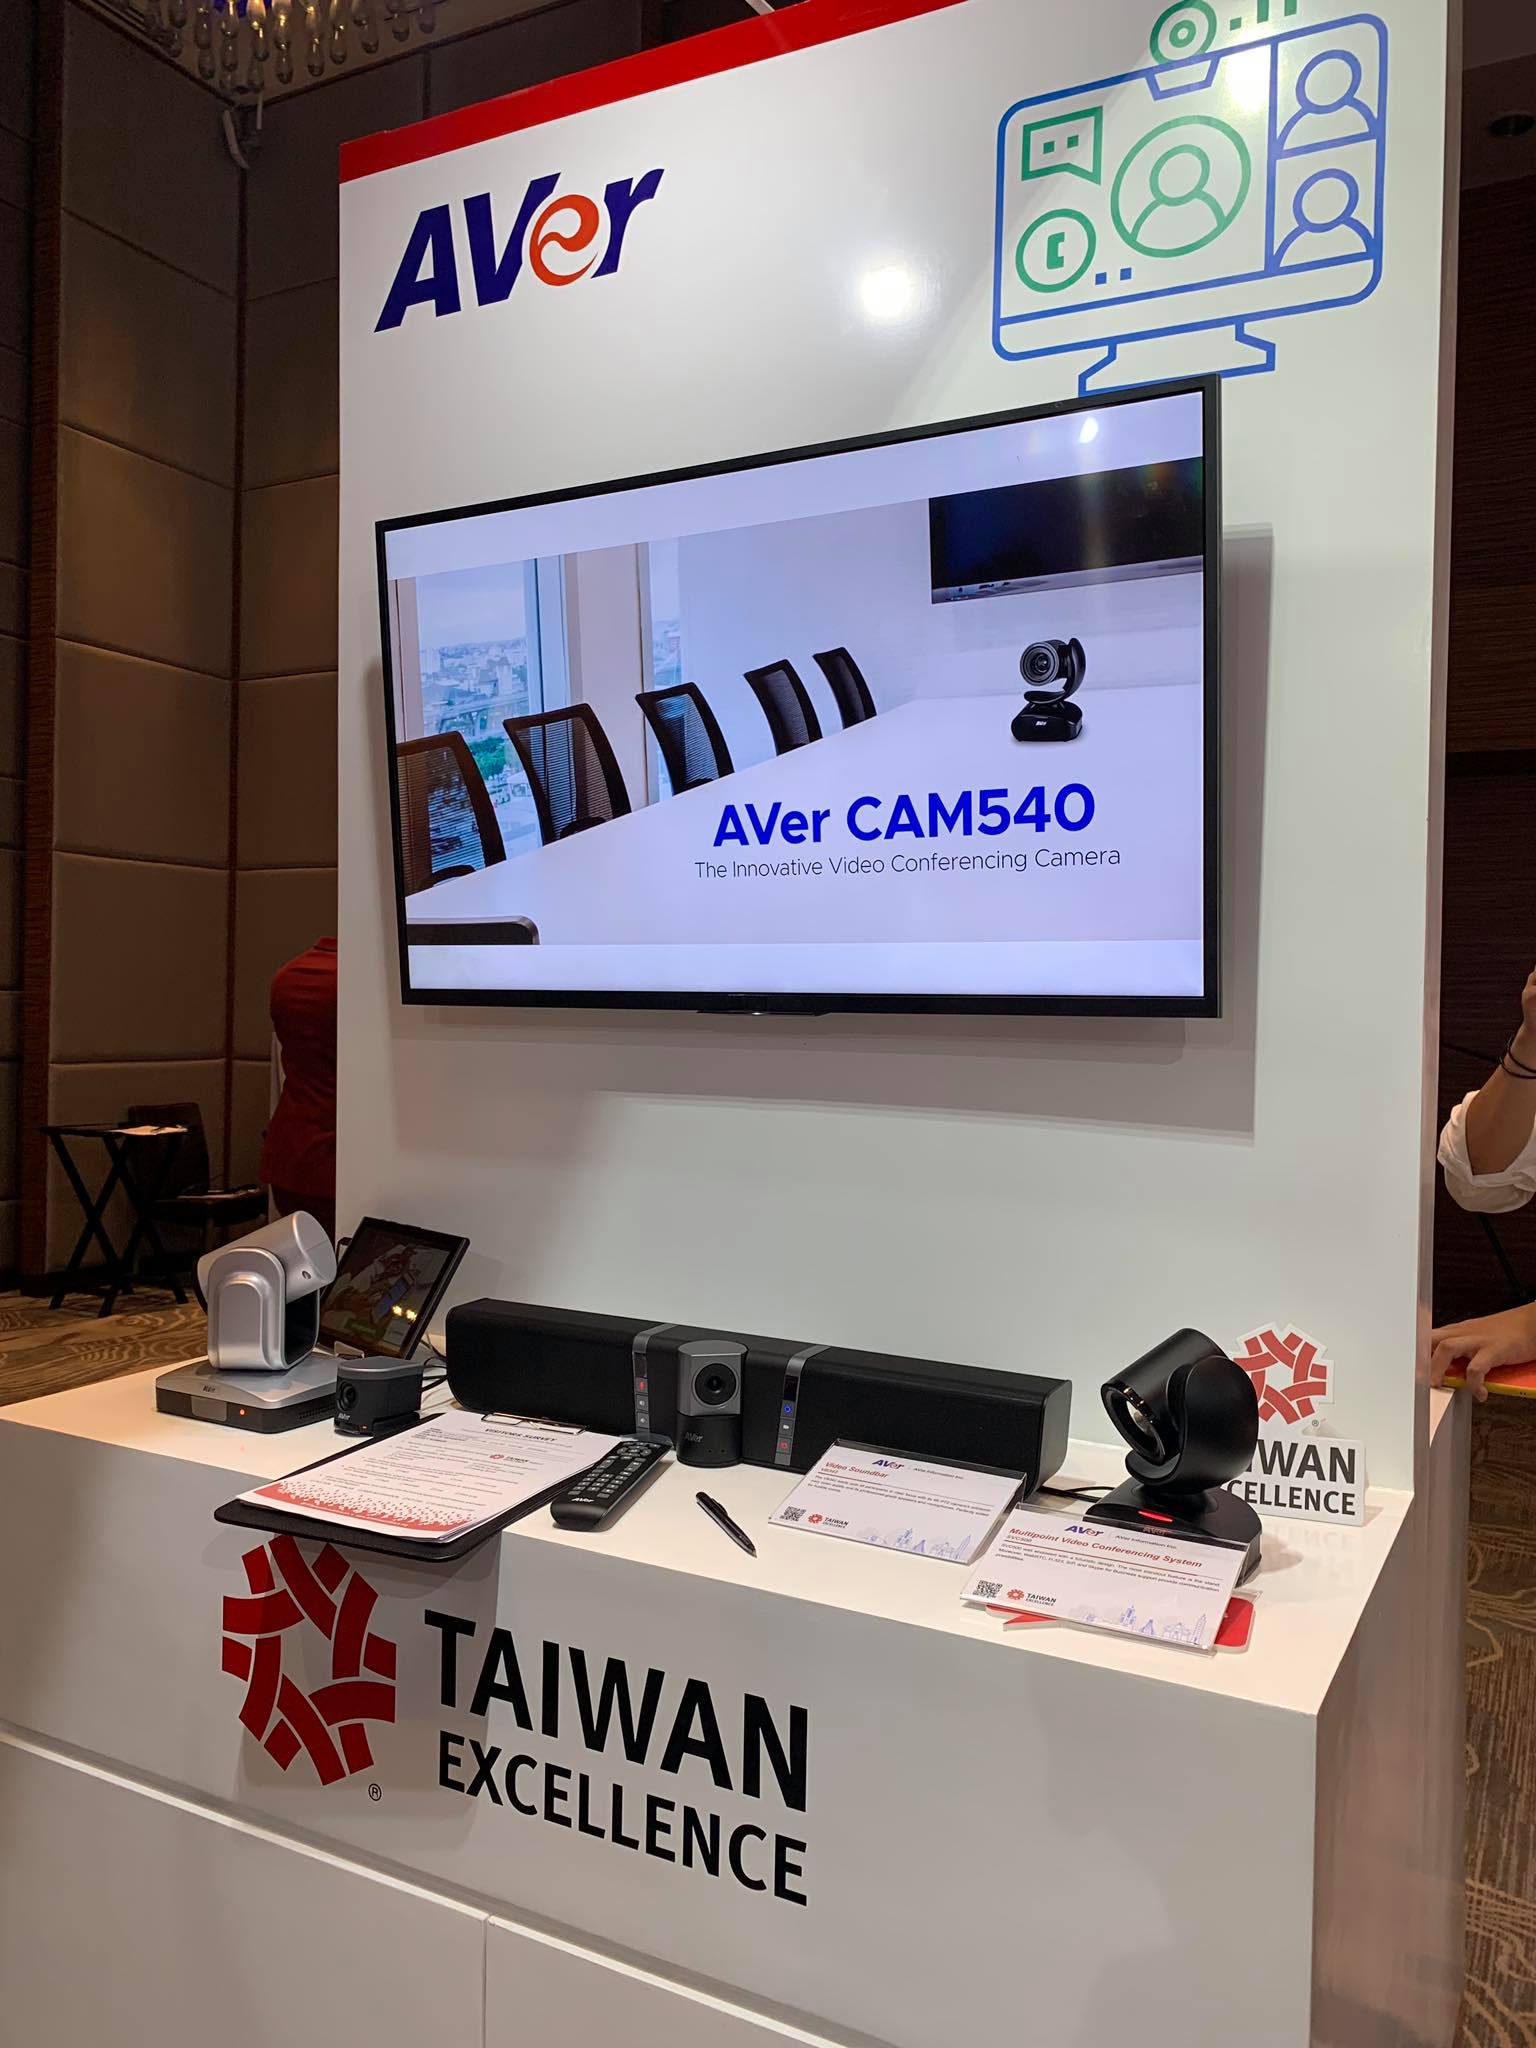 Taiwan Excellence fosters the potential to influence the Ph in the ICT department